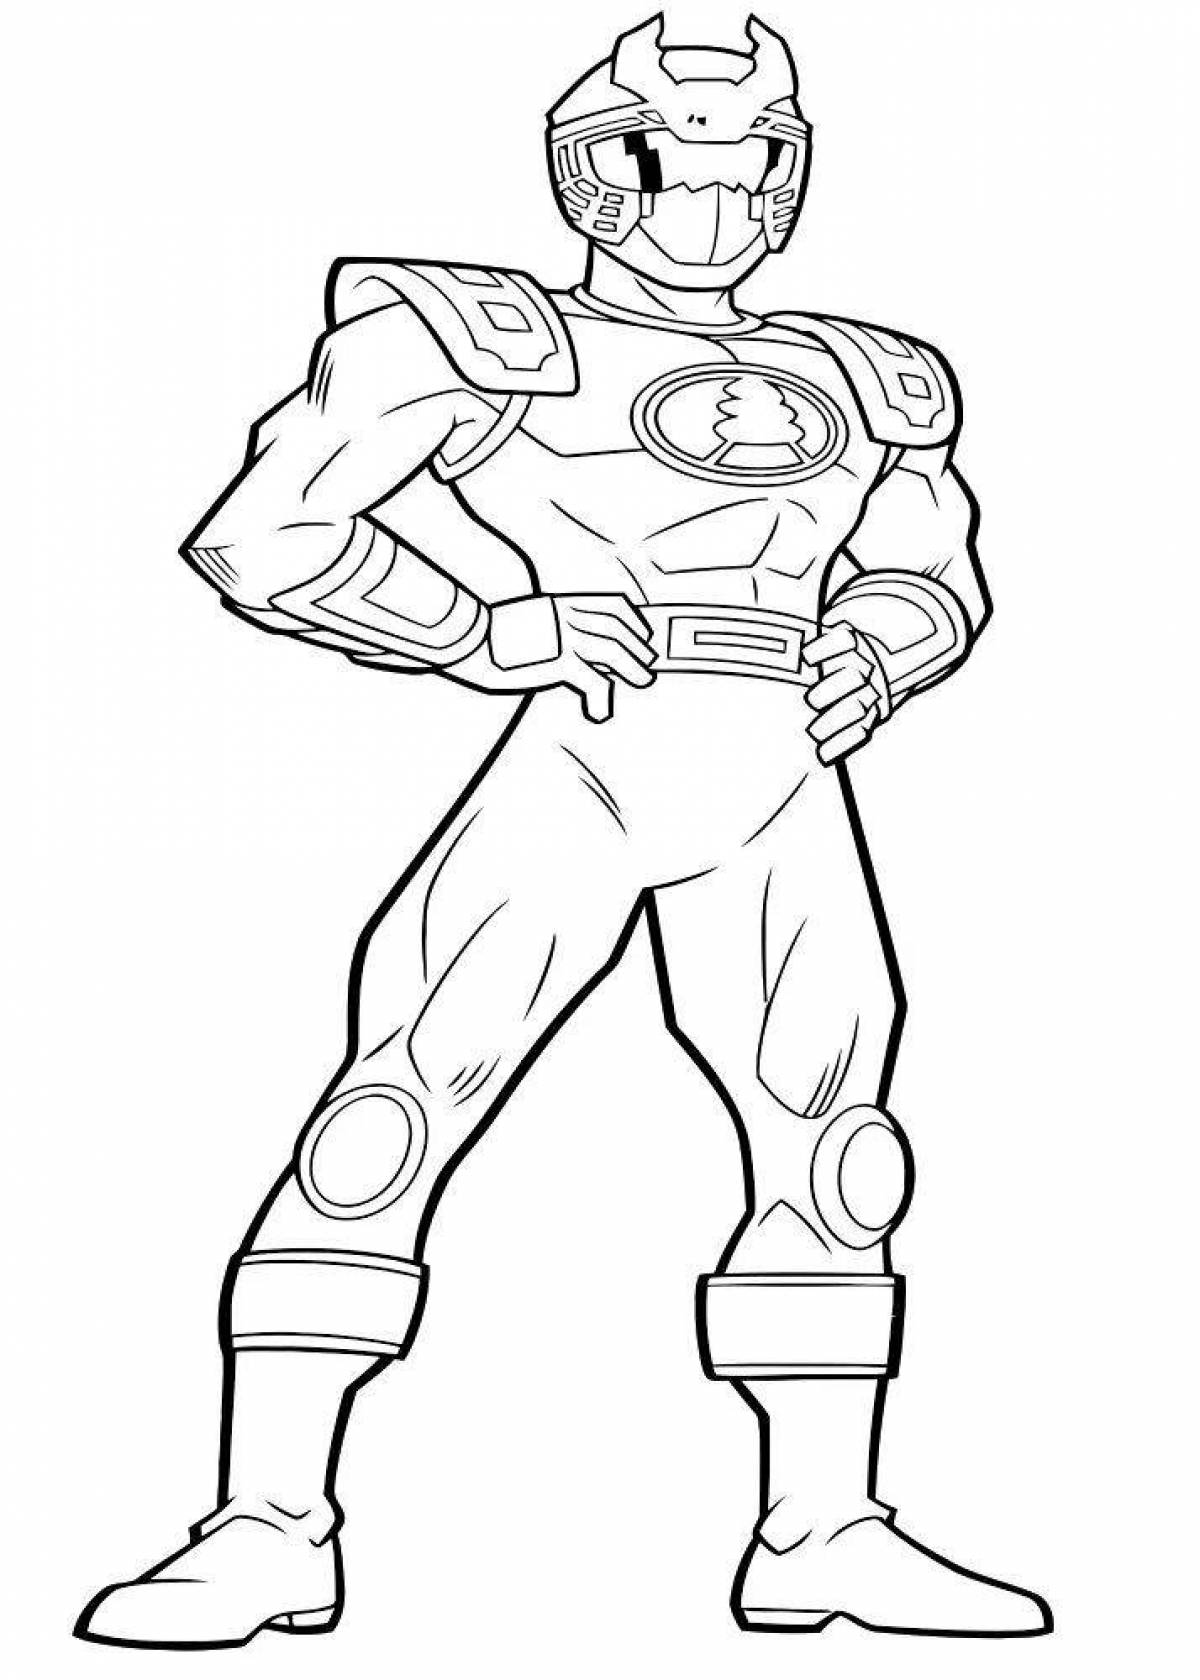 Brave Power Rangers coloring book